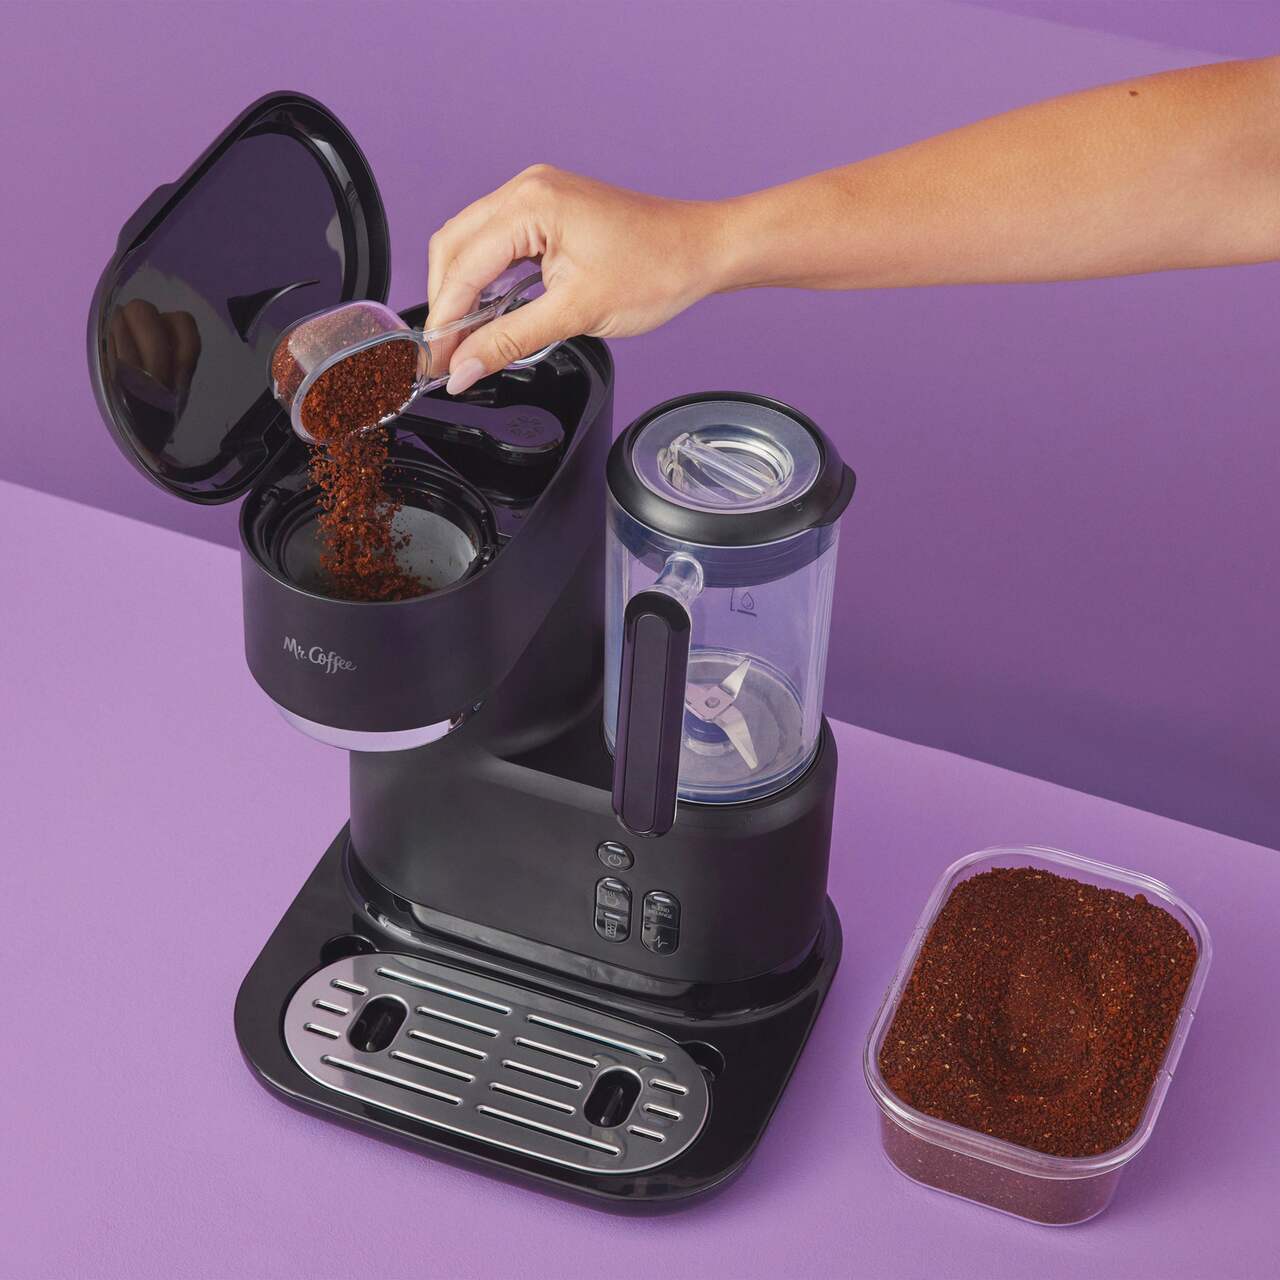 Mr. Coffee Hot Coffee, Iced Coffee & Frappe Maker with Integrated